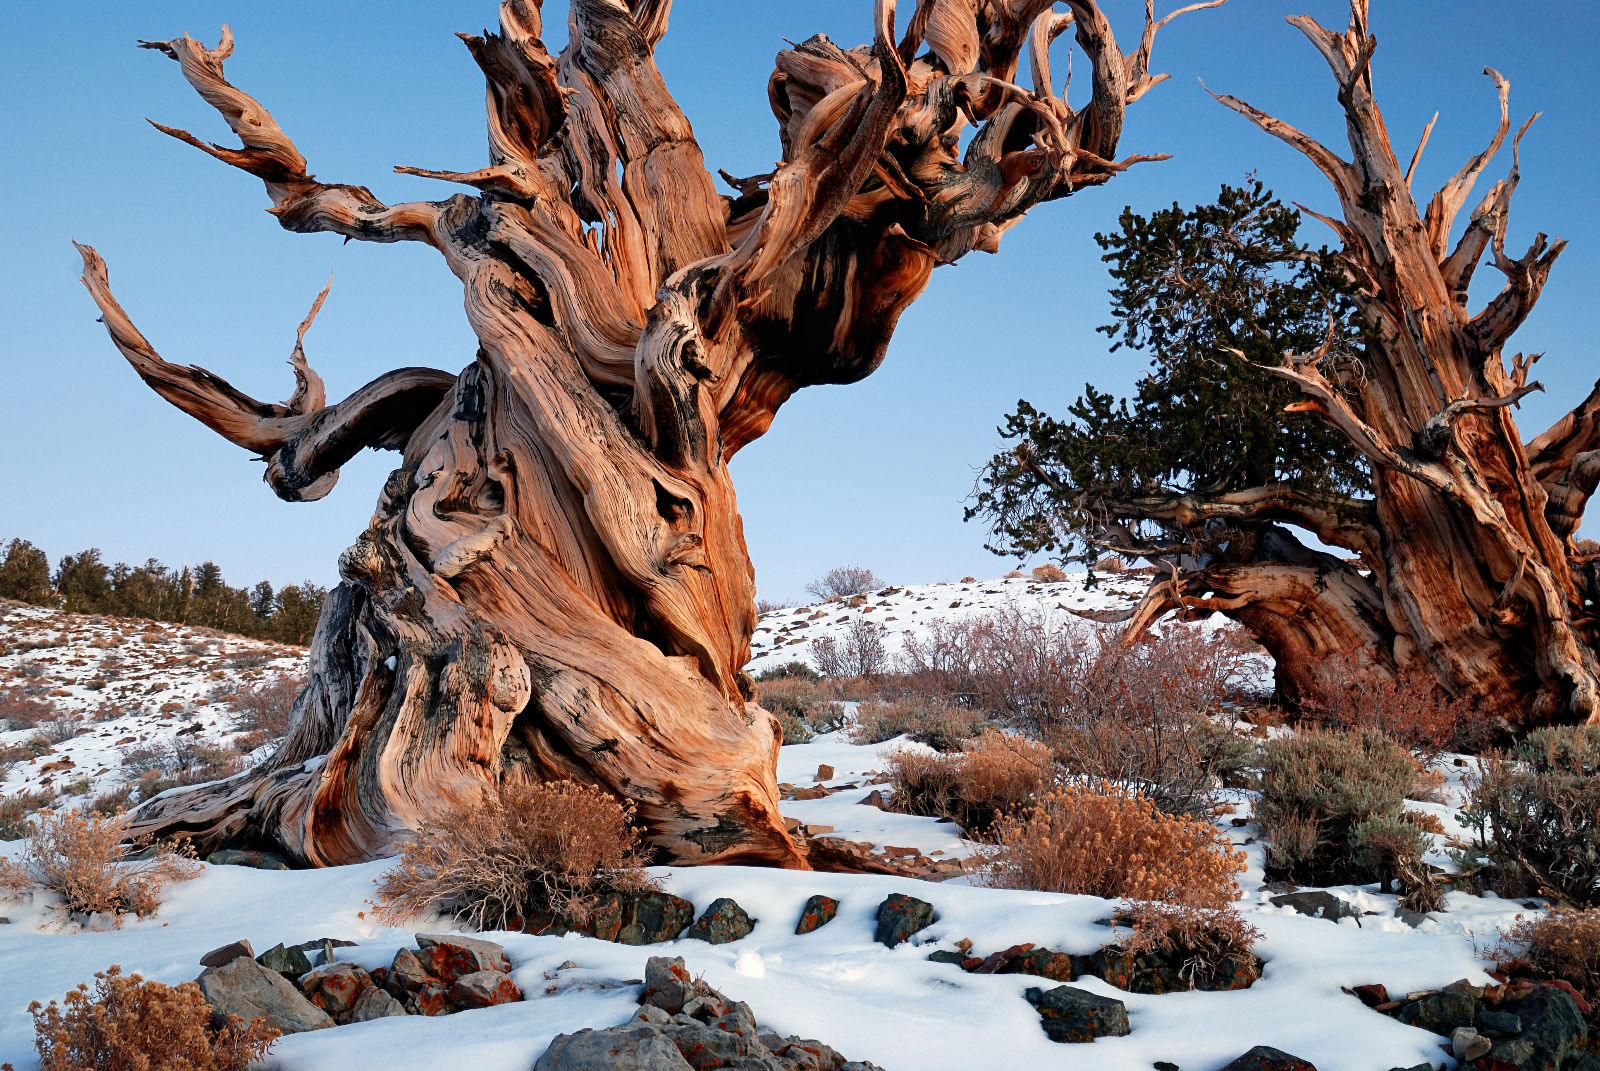 bristlecone pines from wikipedia, probably older than julius caesar himself